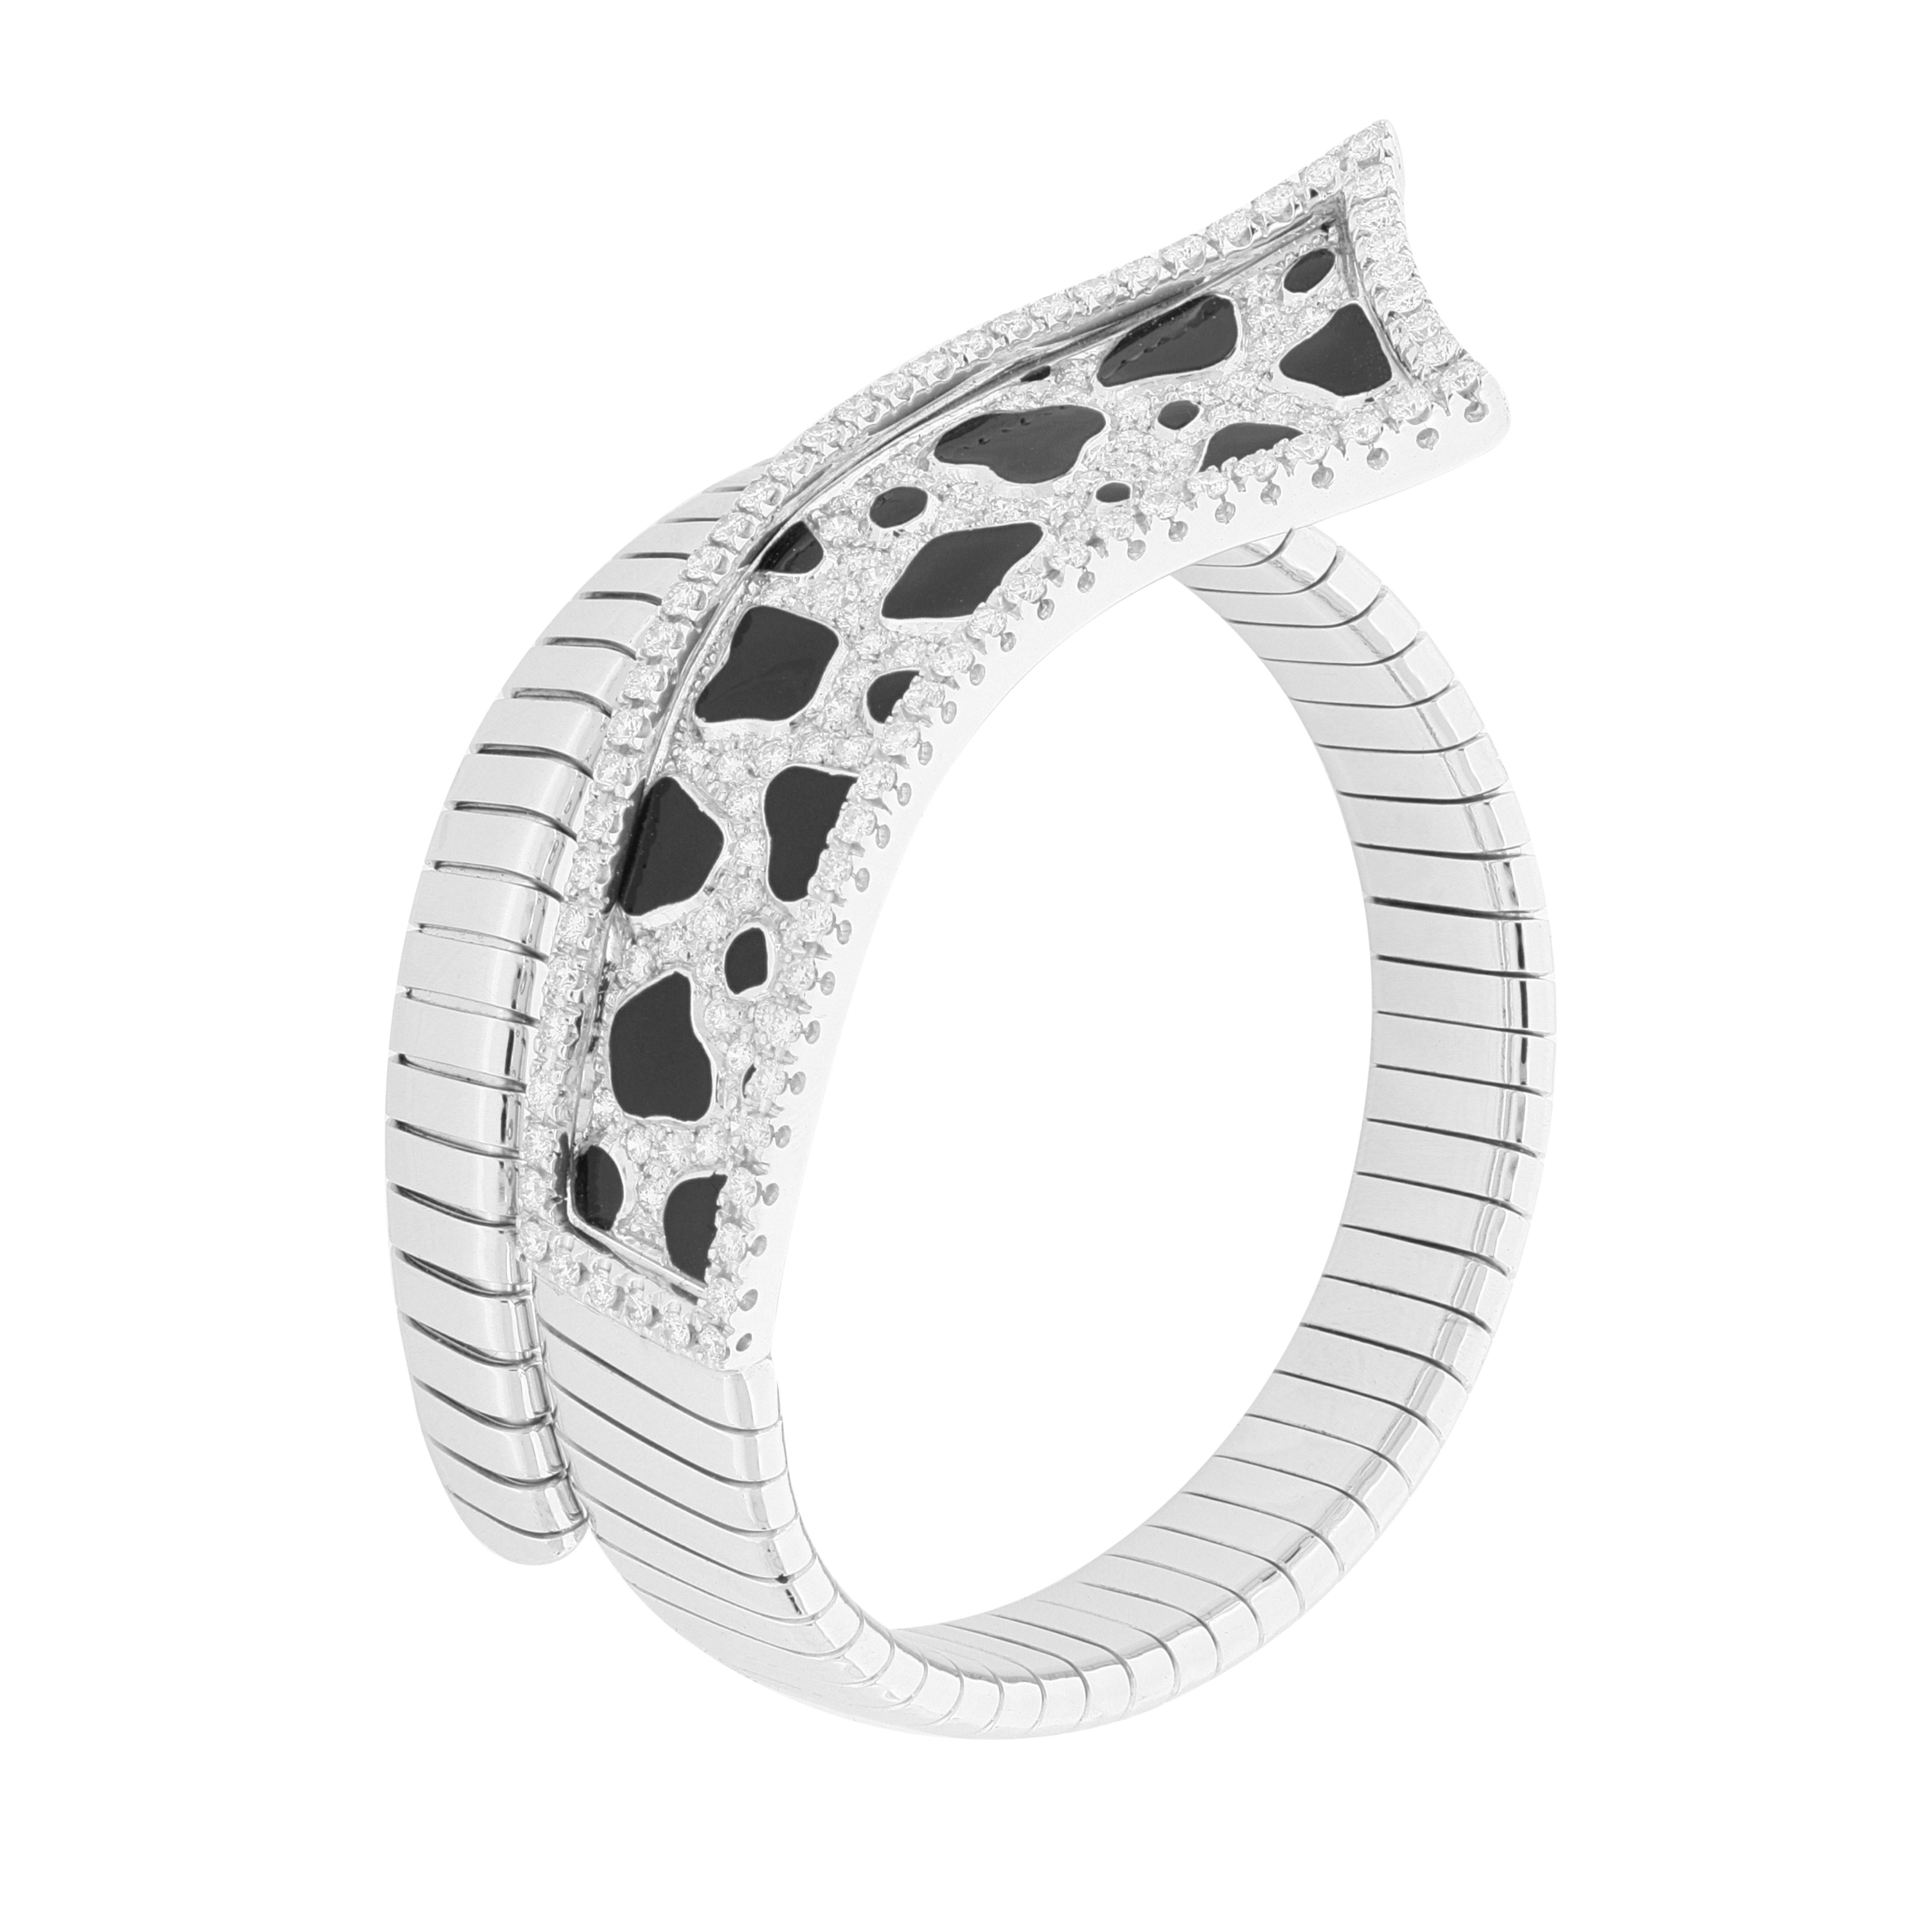 This tubogas bracelet features a cow printed central part made by black enemel and white brillian cut diamonds. Its retro-style is lightened by the fun enamel cow print.
Everything about this bracelet screams 